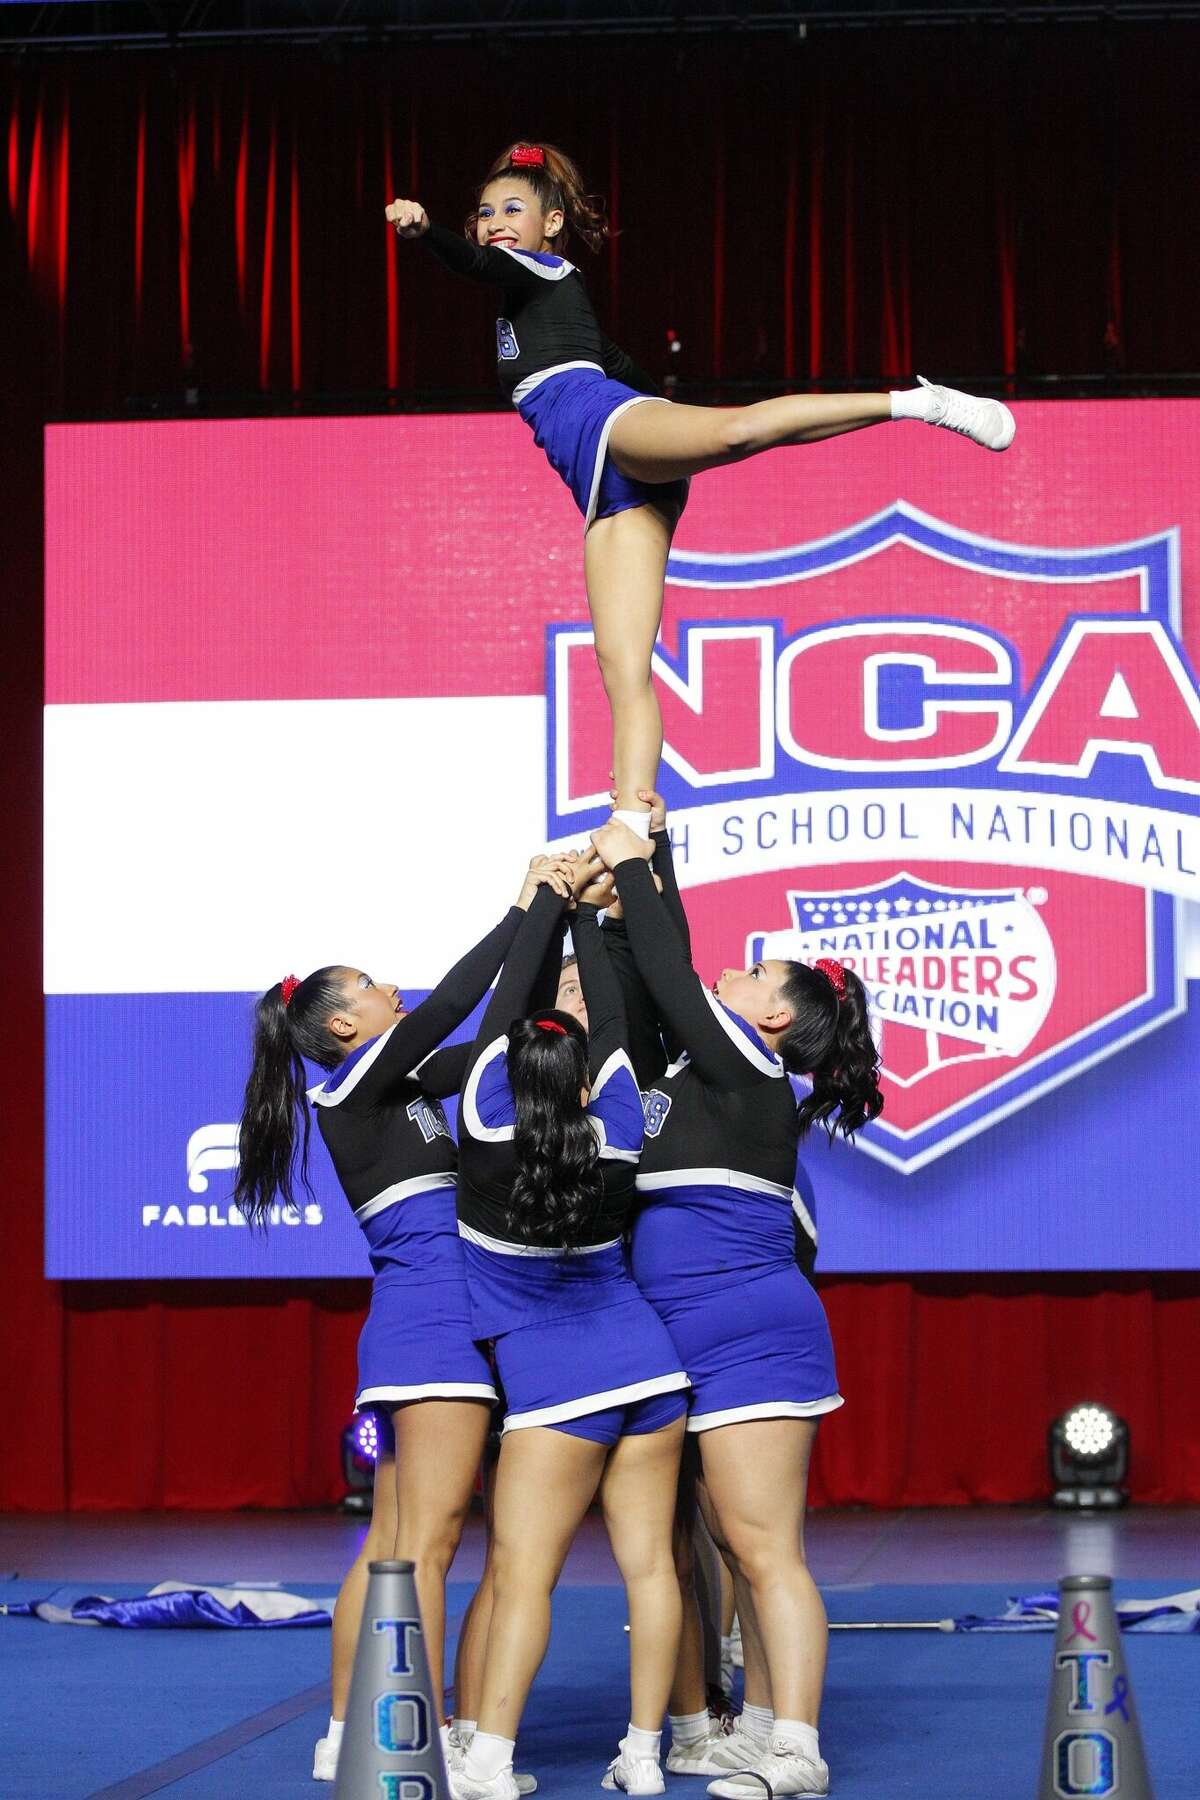 The Cigarroa High School Cheerleaders won top honors at one of the most prestigious cheerleading competitions, the NCA High School Nationals, produced by the National Cheerleaders Association in Dallas, Texas.